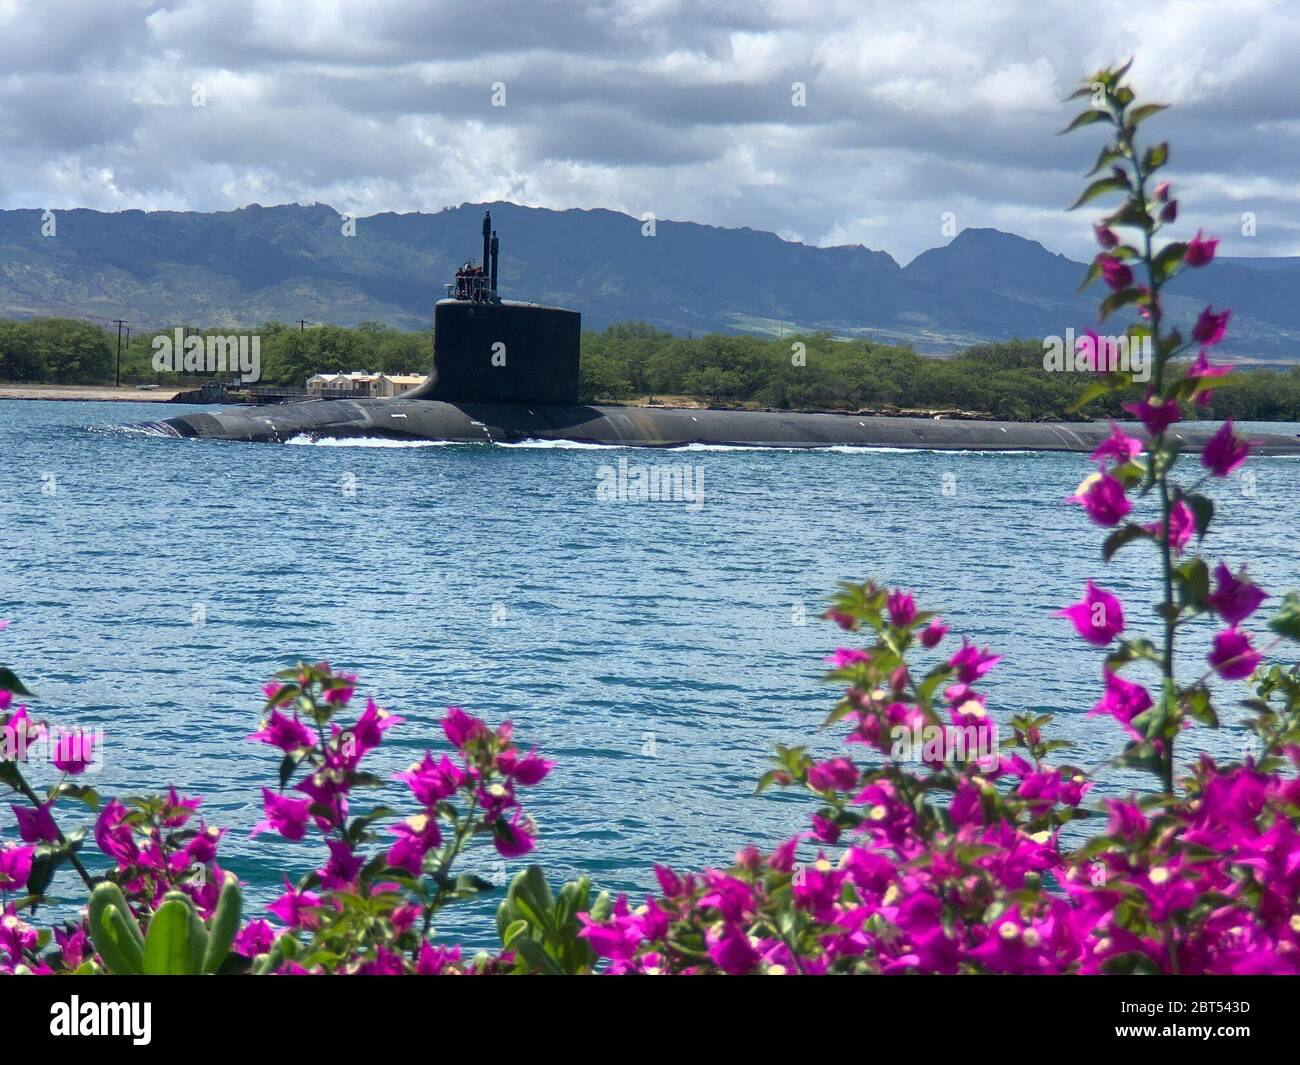 PEARL HARBOR, Hawaii (May 10, 2020) – USS Missouri (SSN 780), a Virginia-class fast-attack submarine, departs Pearl Harbor after completing a scheduled extended dry-docking selected restricted availability (EDSRA). Missouri's routine maintenance and modernization work was completed five days ahead of schedule after successful sea trials and certification. The submarine's recent availability required 2.2 million work-hours to complete more than 20,000 jobs that will ensure the ship remains fully operational for its planned 33-year service life. Stock Photo